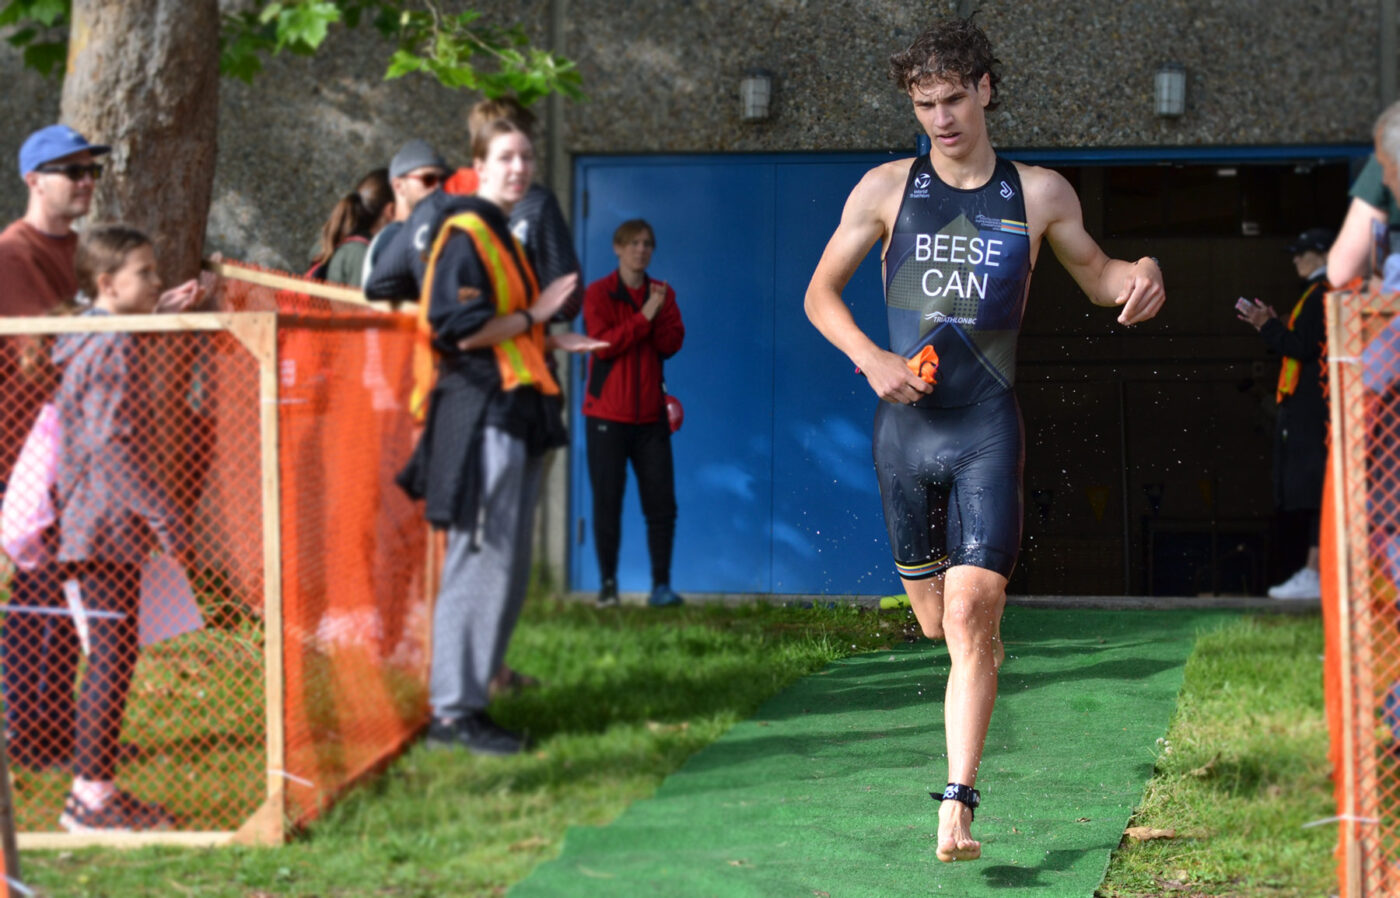 A racer comes ripping out of the pool at the Victoria Youth Triathlon at UVic.